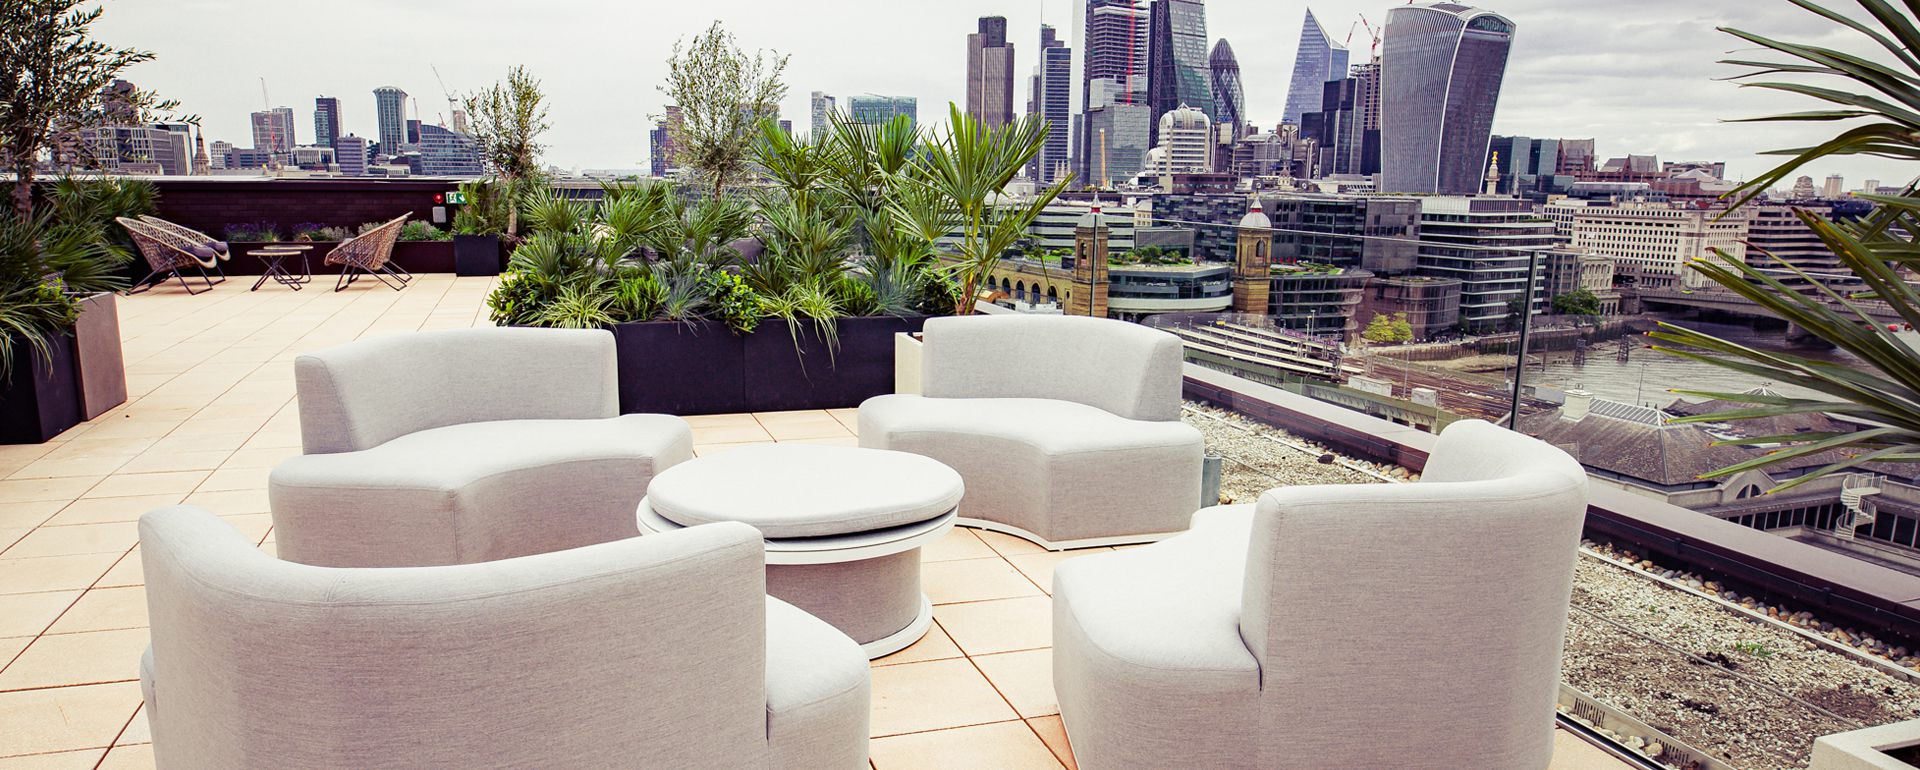 Seating on the roof terrace